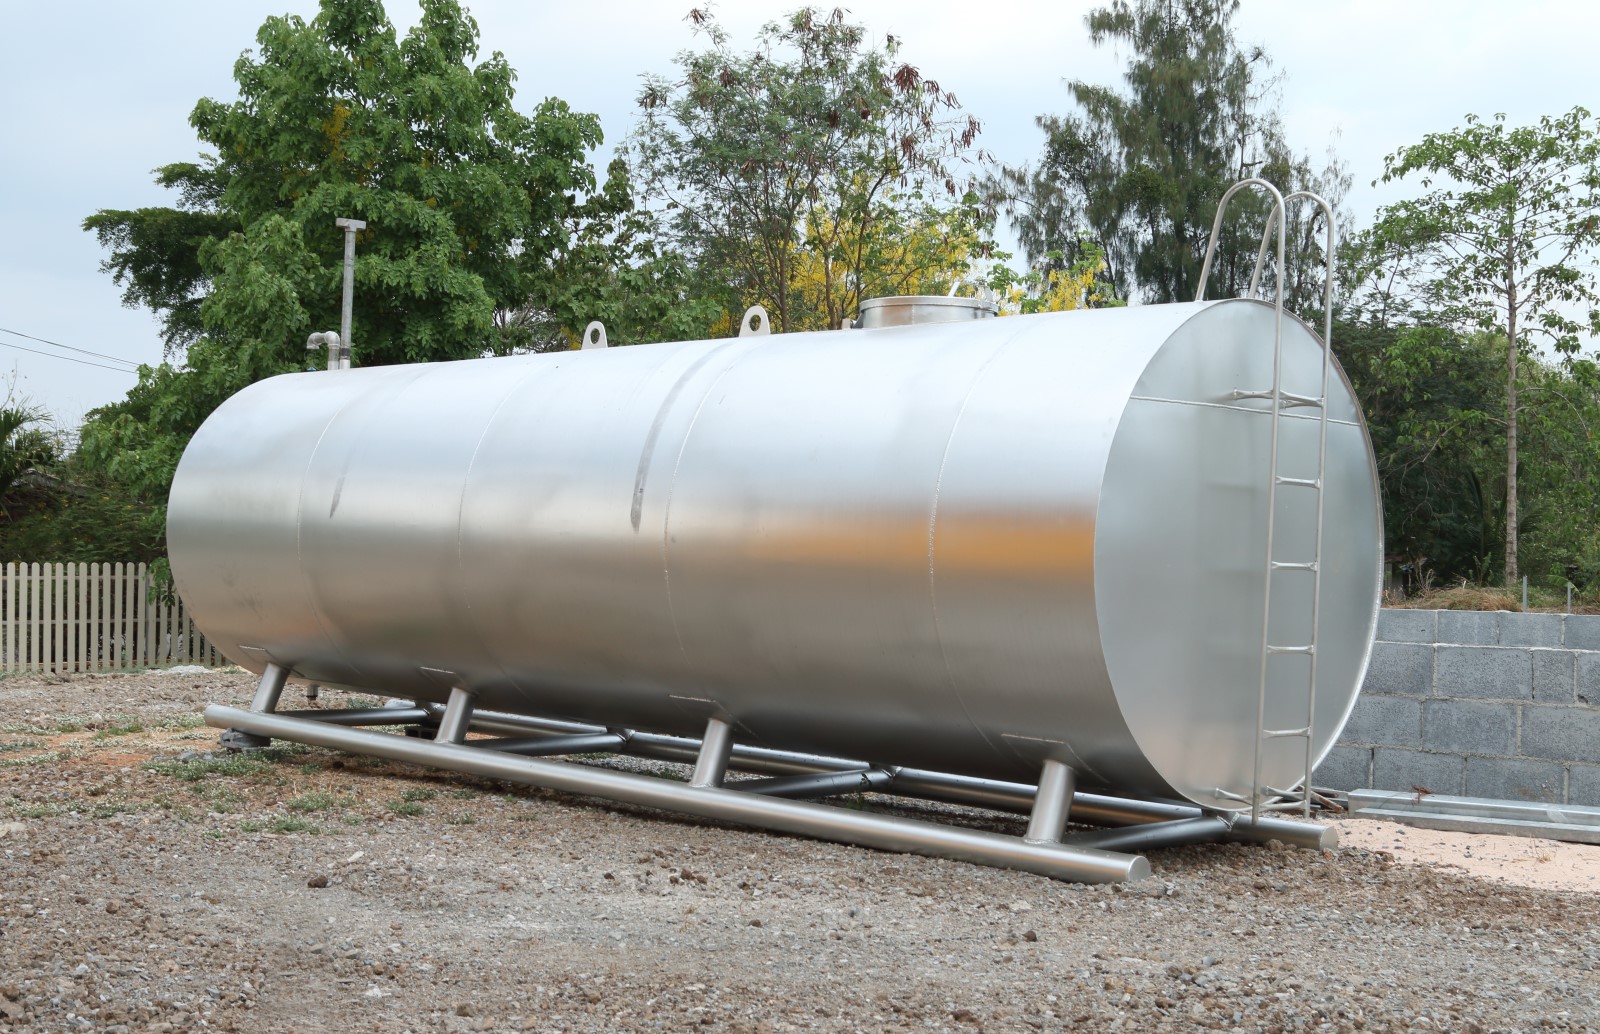 An external fuel storage tank with new protective insulation installed.